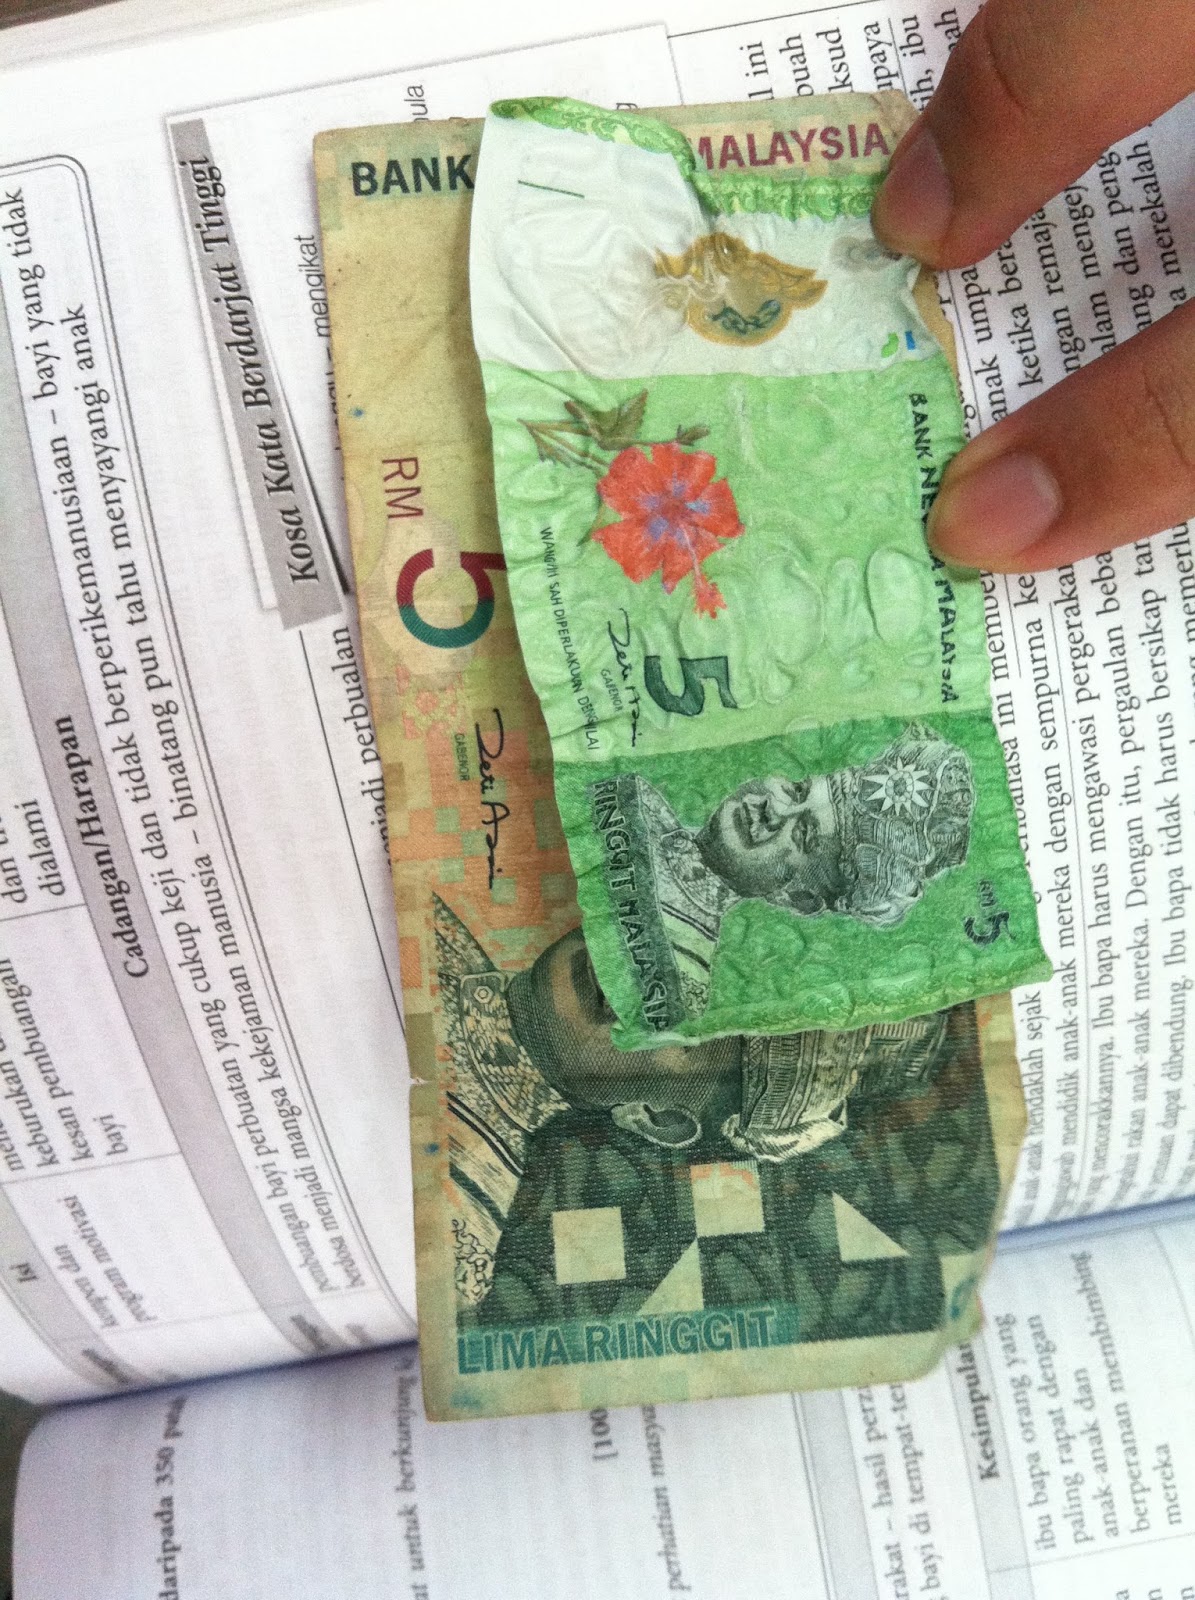 school, my classmate showed us this. His new RM5 ringgit paper shrink ...